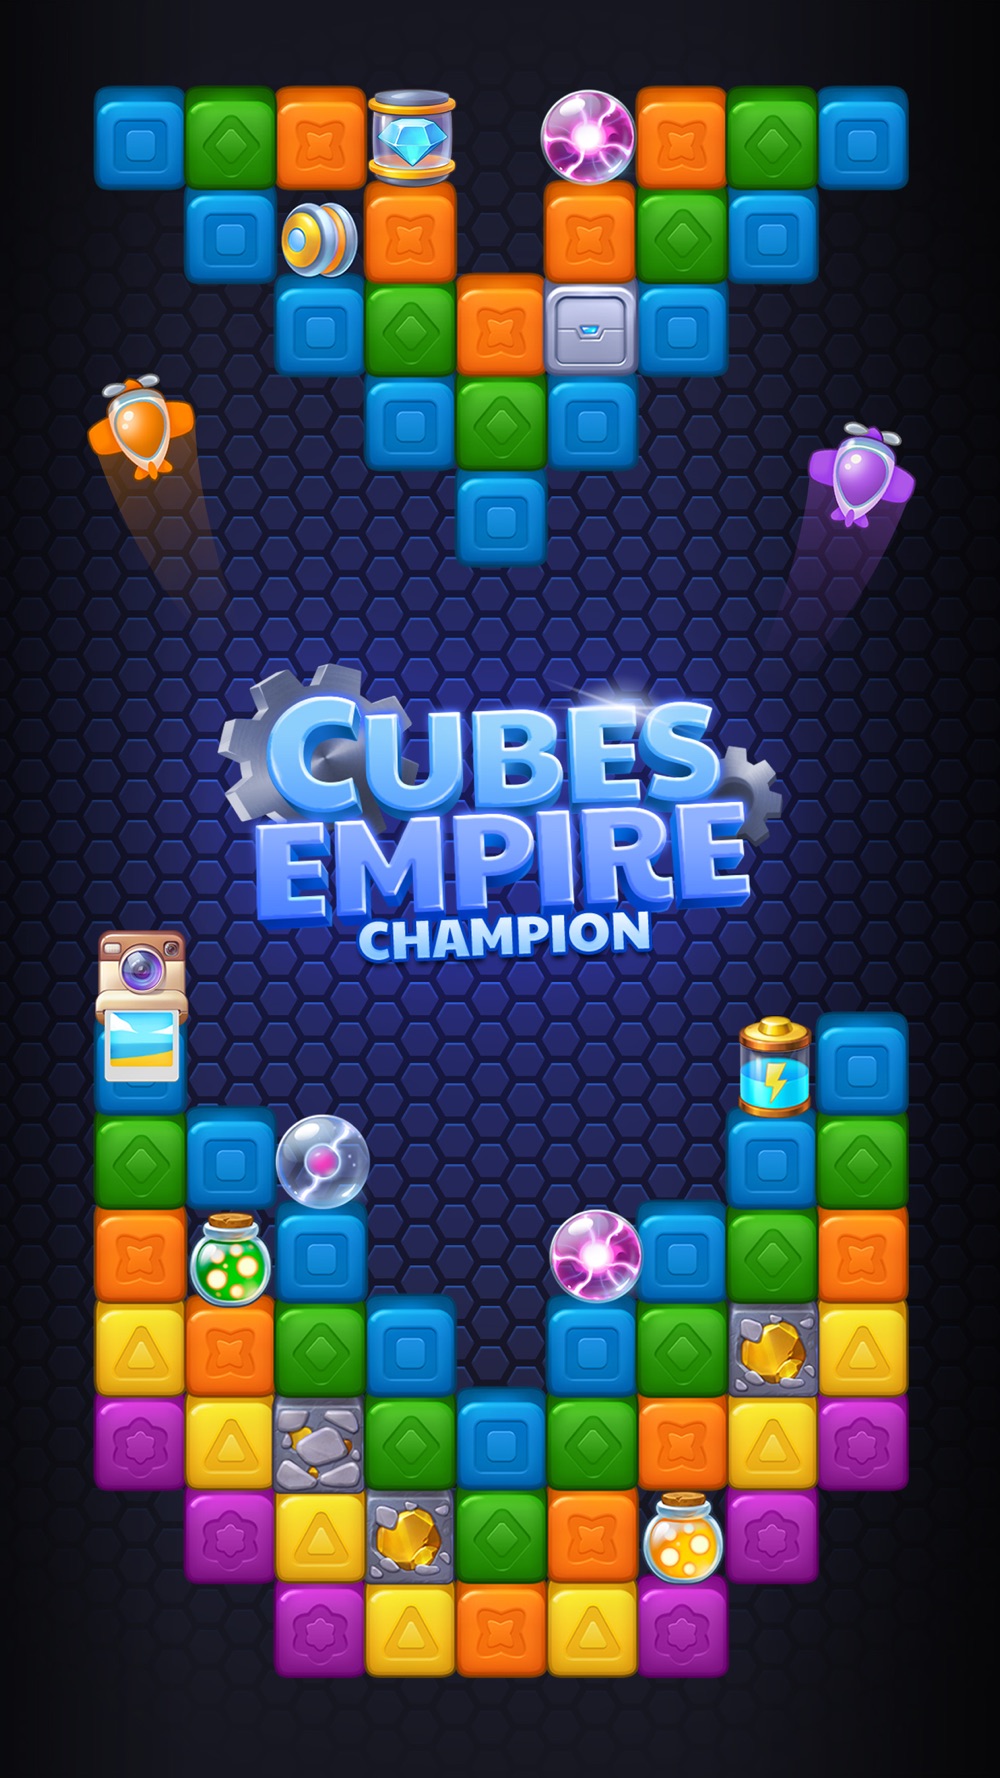 Cubes Empire Champion Free Download App for iPhone - STEPrimo.com